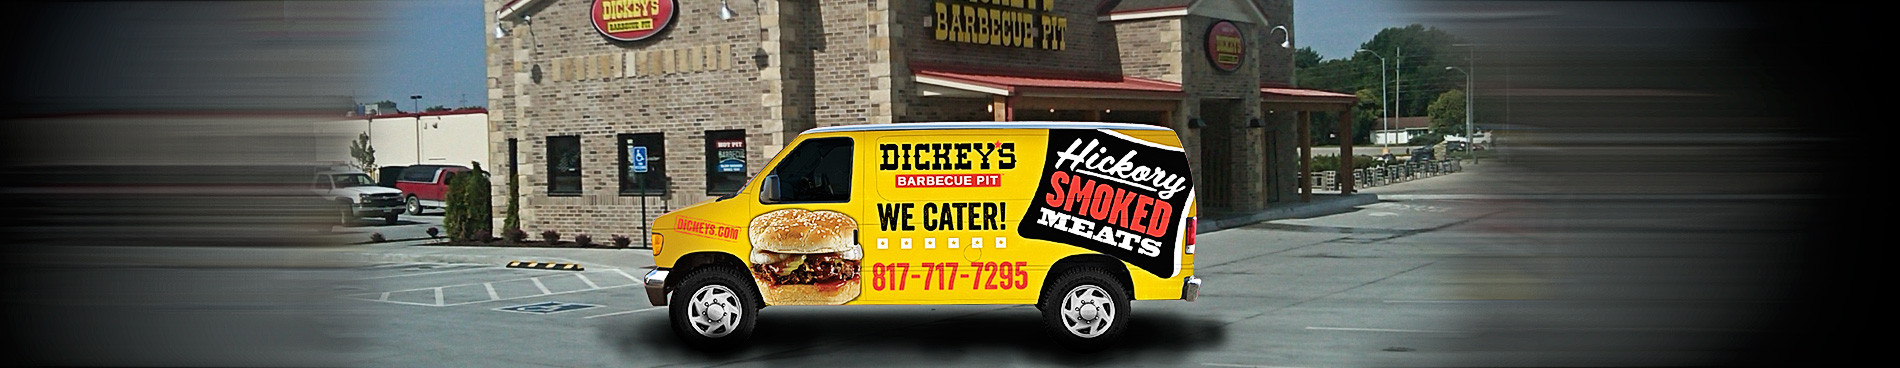 Dickey's- Advertise on Your Car